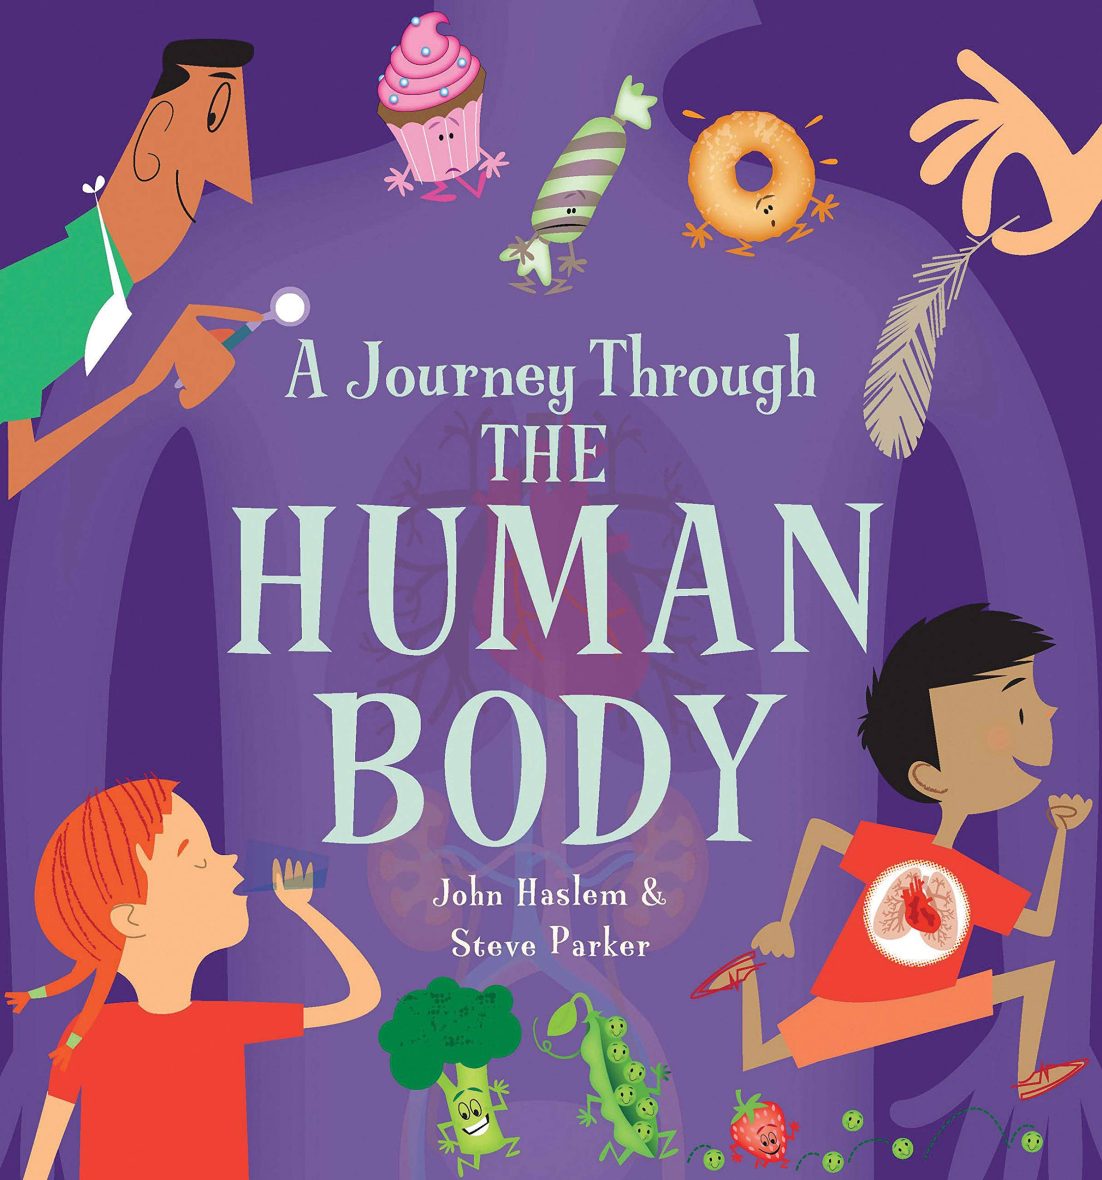 A Journey Through the Human Body (Hardcover)